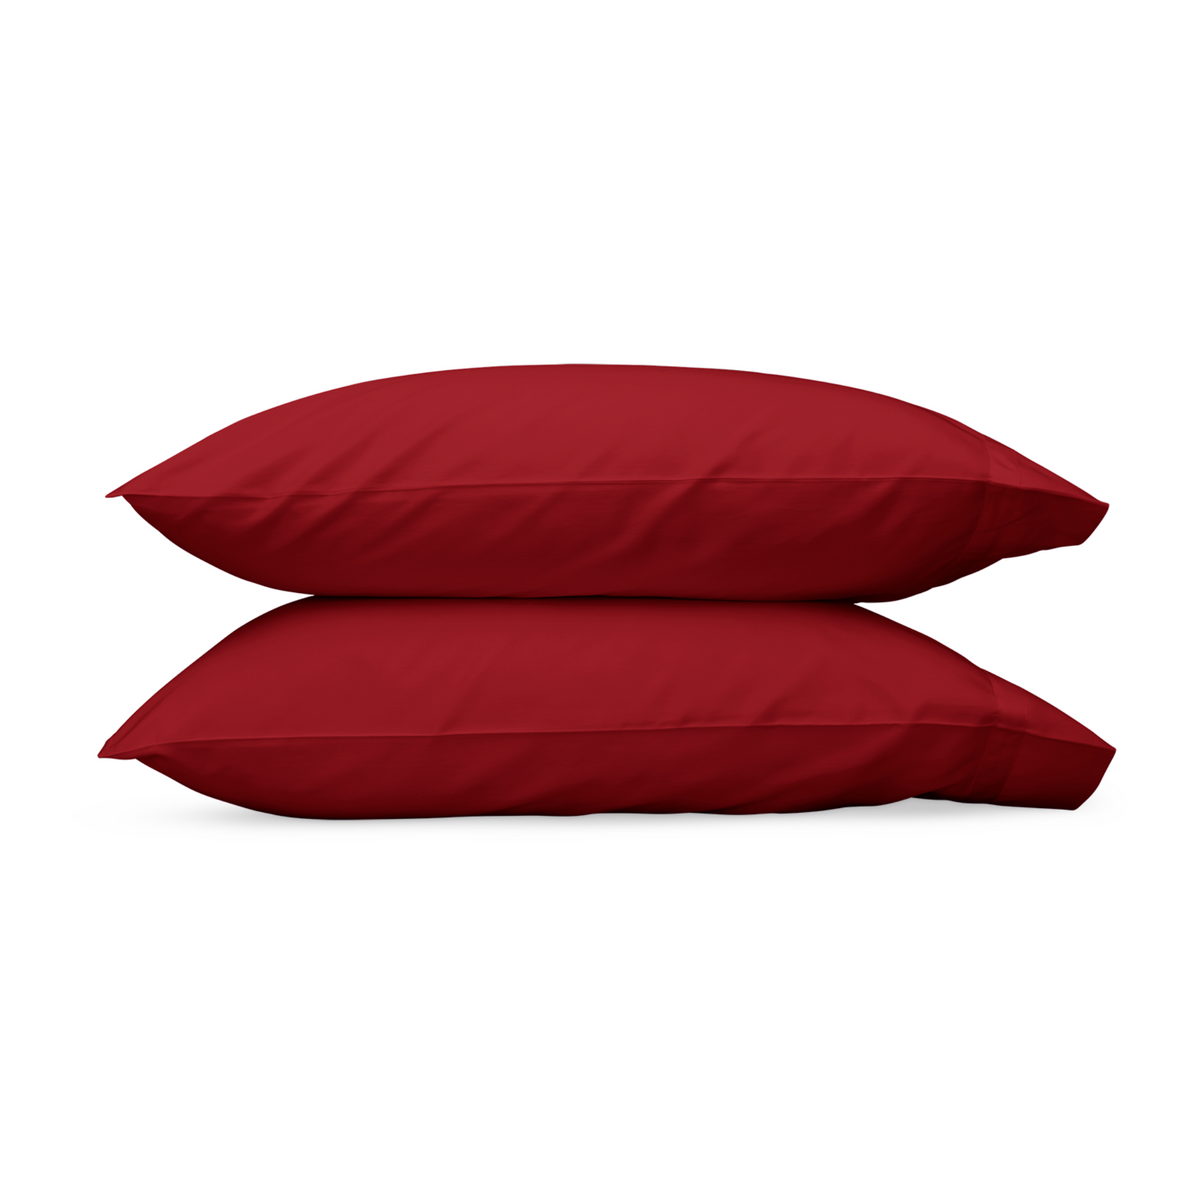 Pair of Pillowcases of Matouk Nocturne Bedding in Scarlet Color